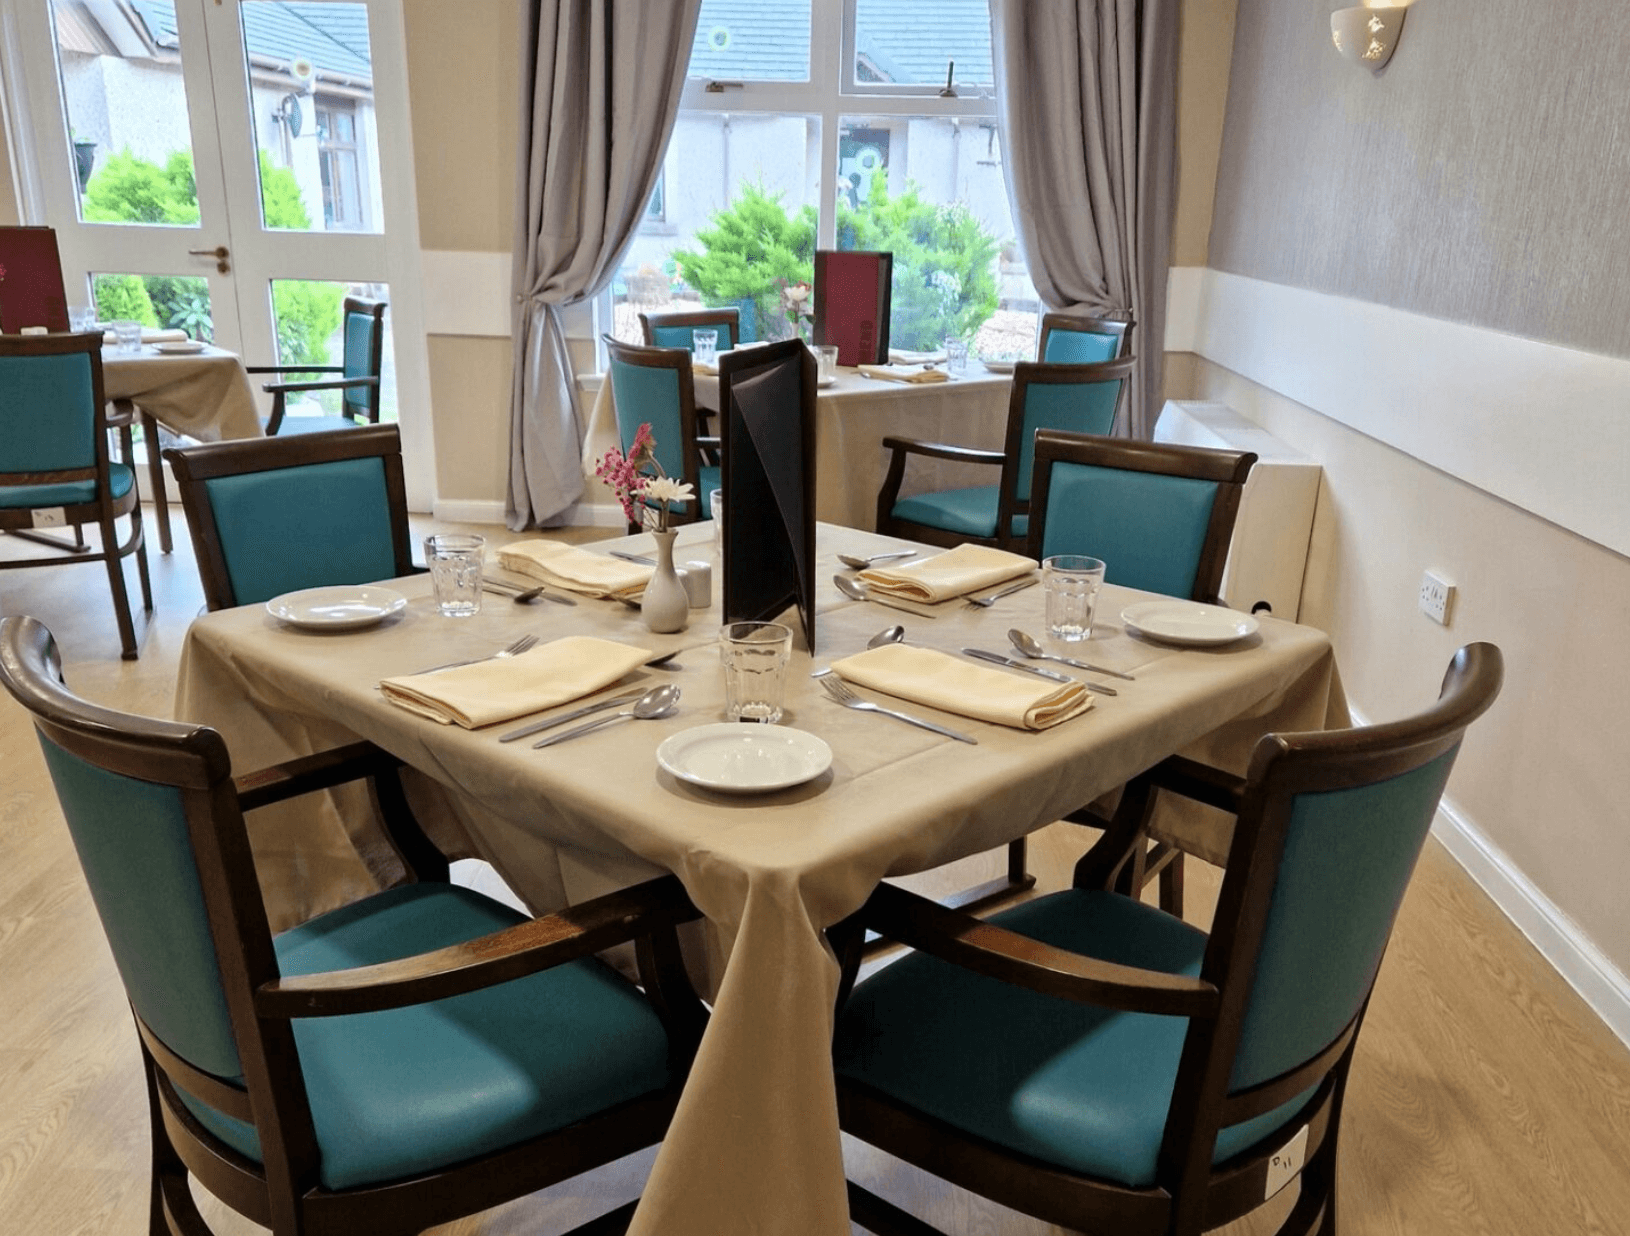 Dining room of Annan Court Care Home in Annan, Scotland